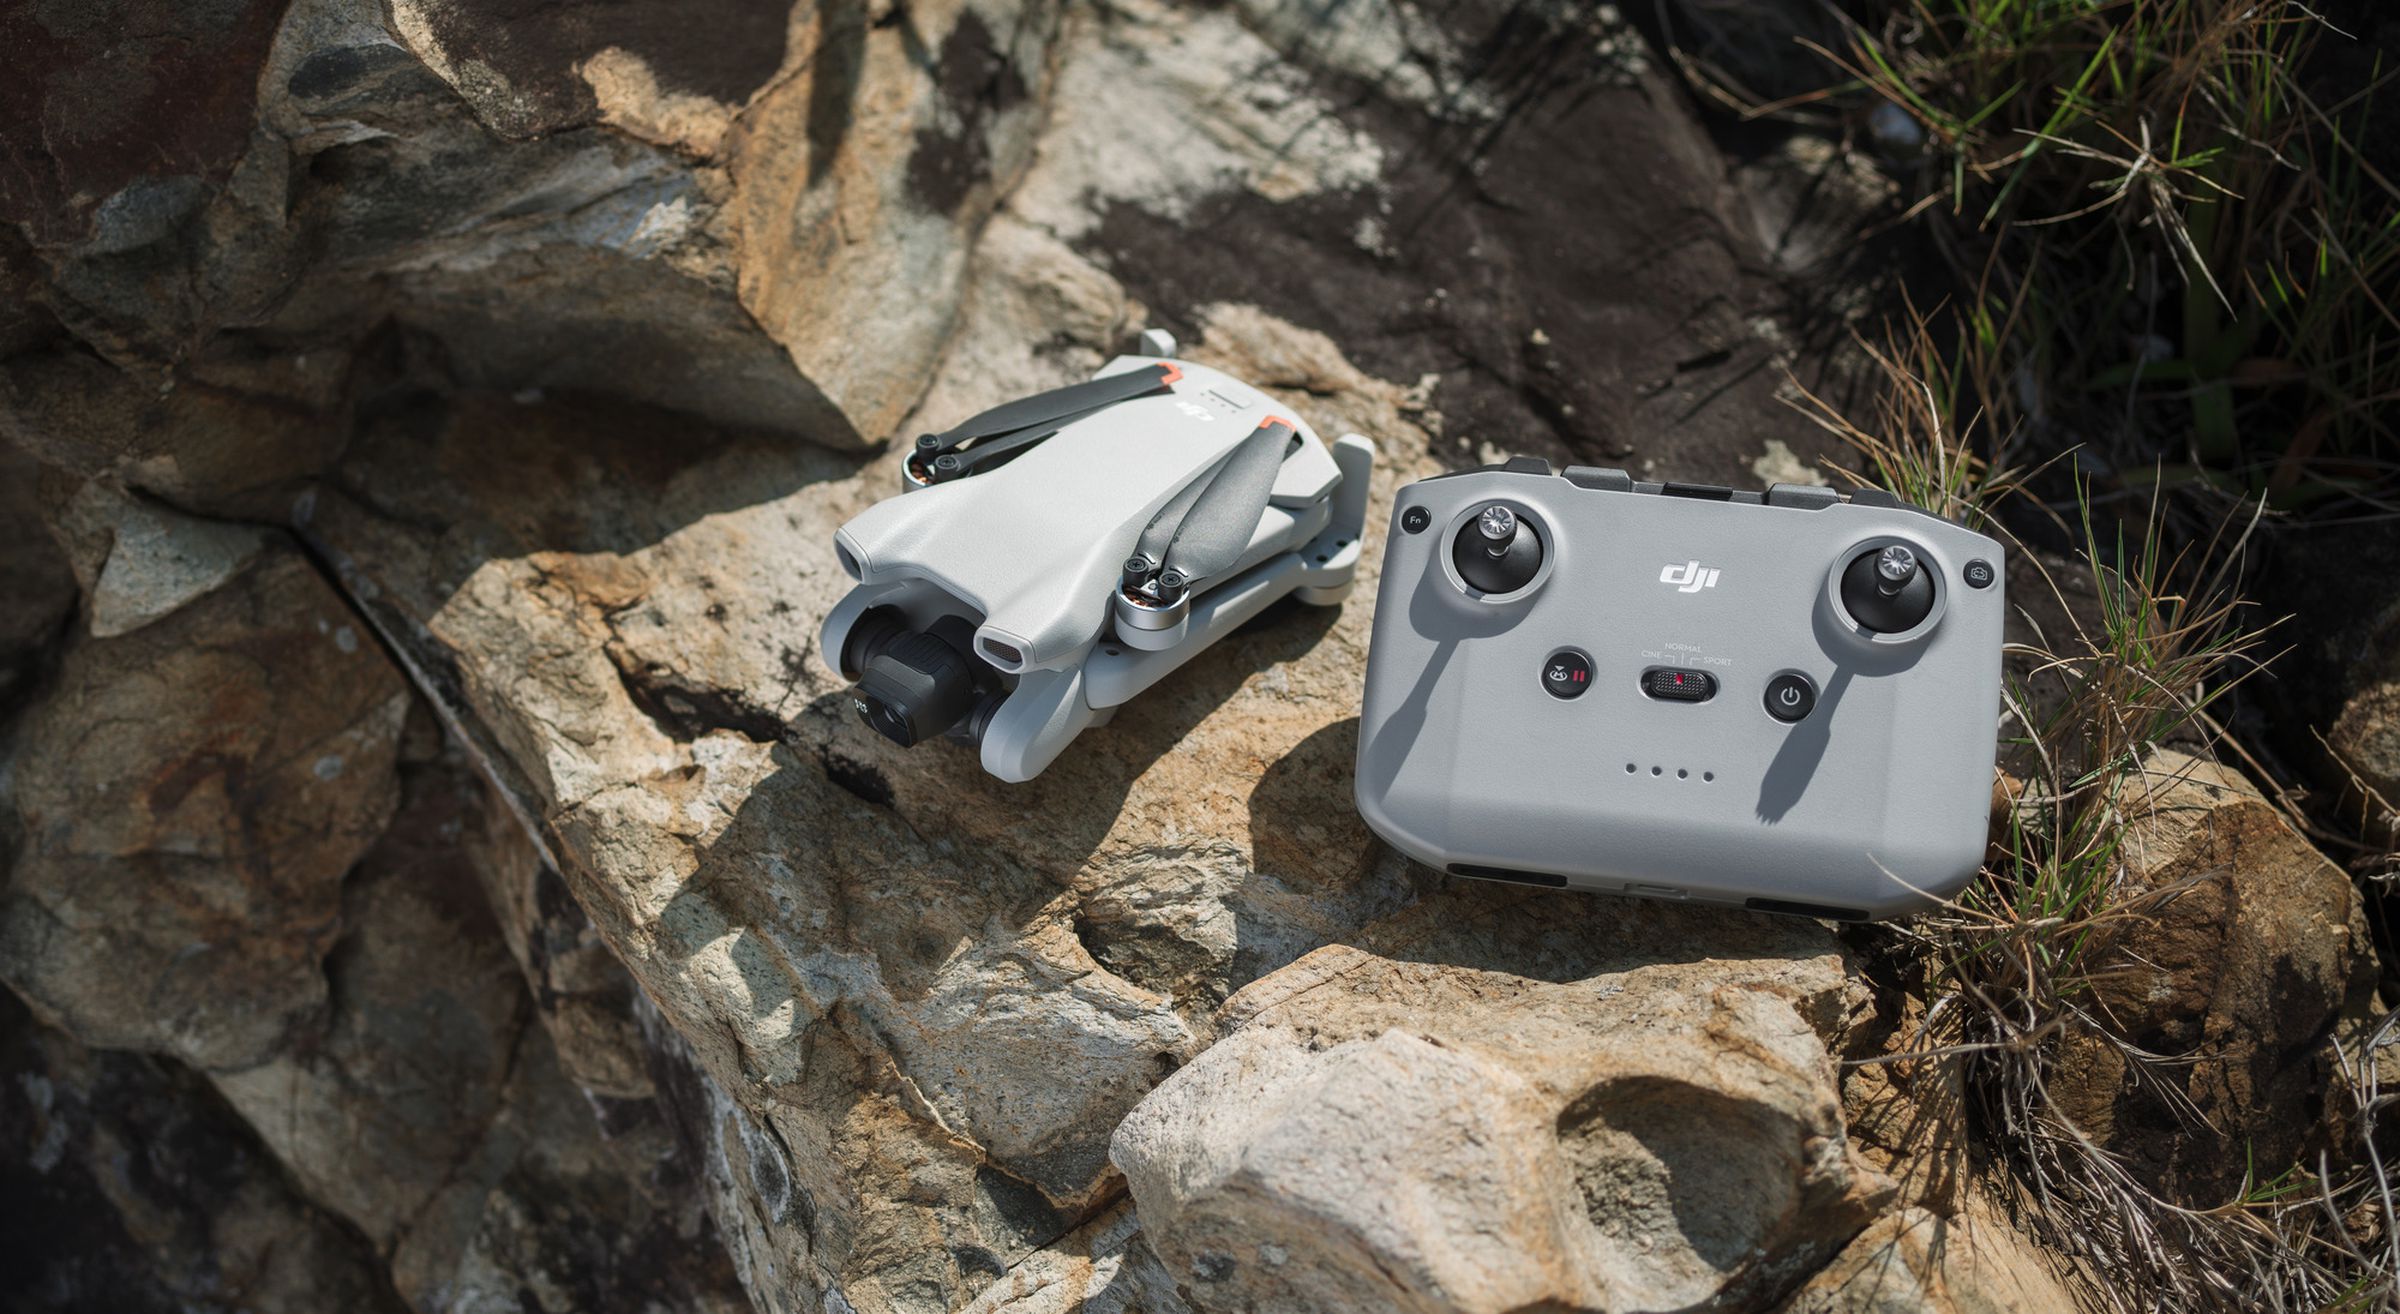 The DJI Mini 3 drone without the blades extended next to the DJI RC-N1 controller. Both products are resting on a large rock in an outdoor environment.